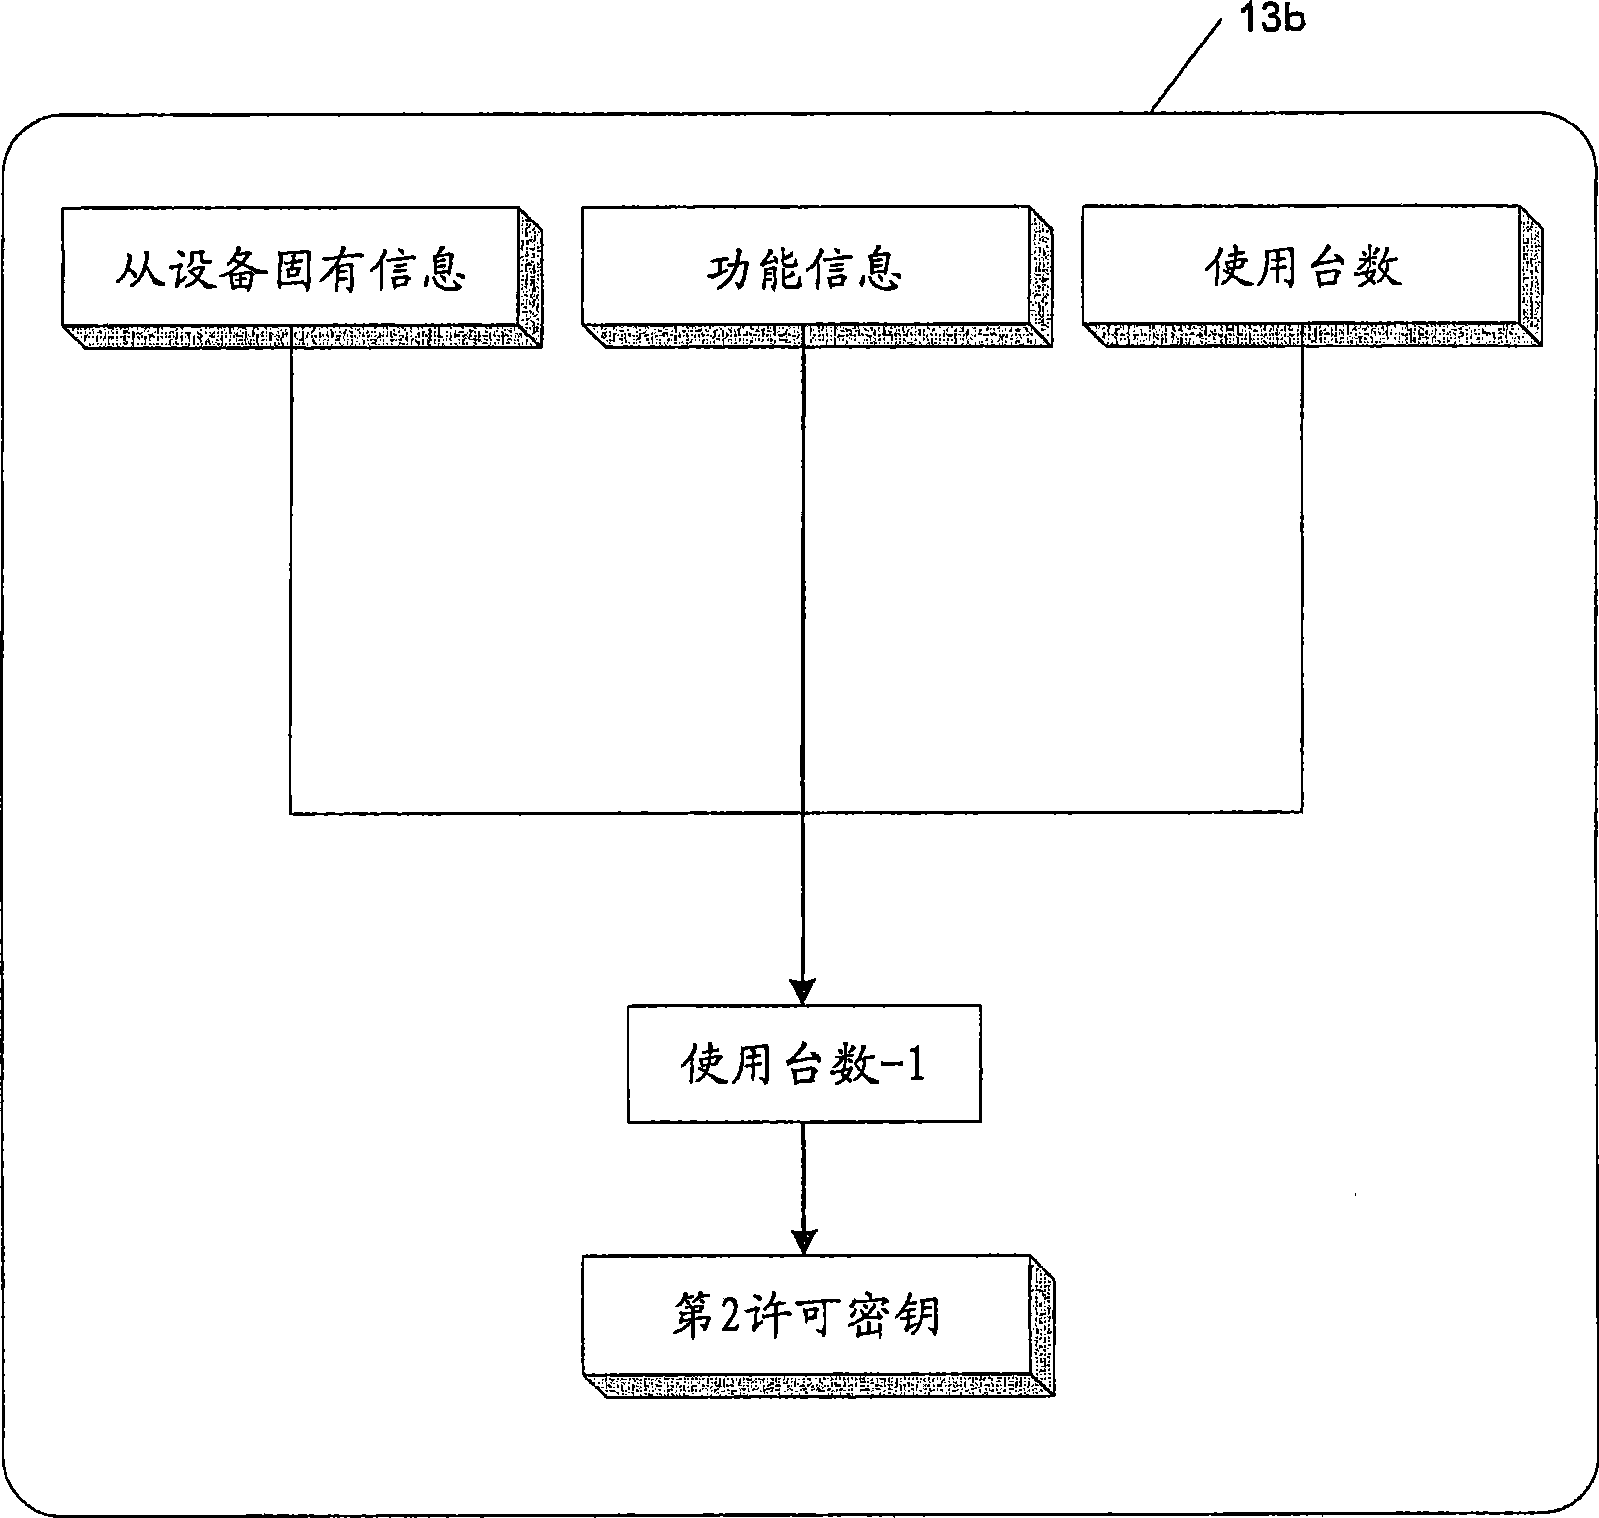 Apparatus for enabling functions to be valid in plurality of devices, network system, method, and computer program